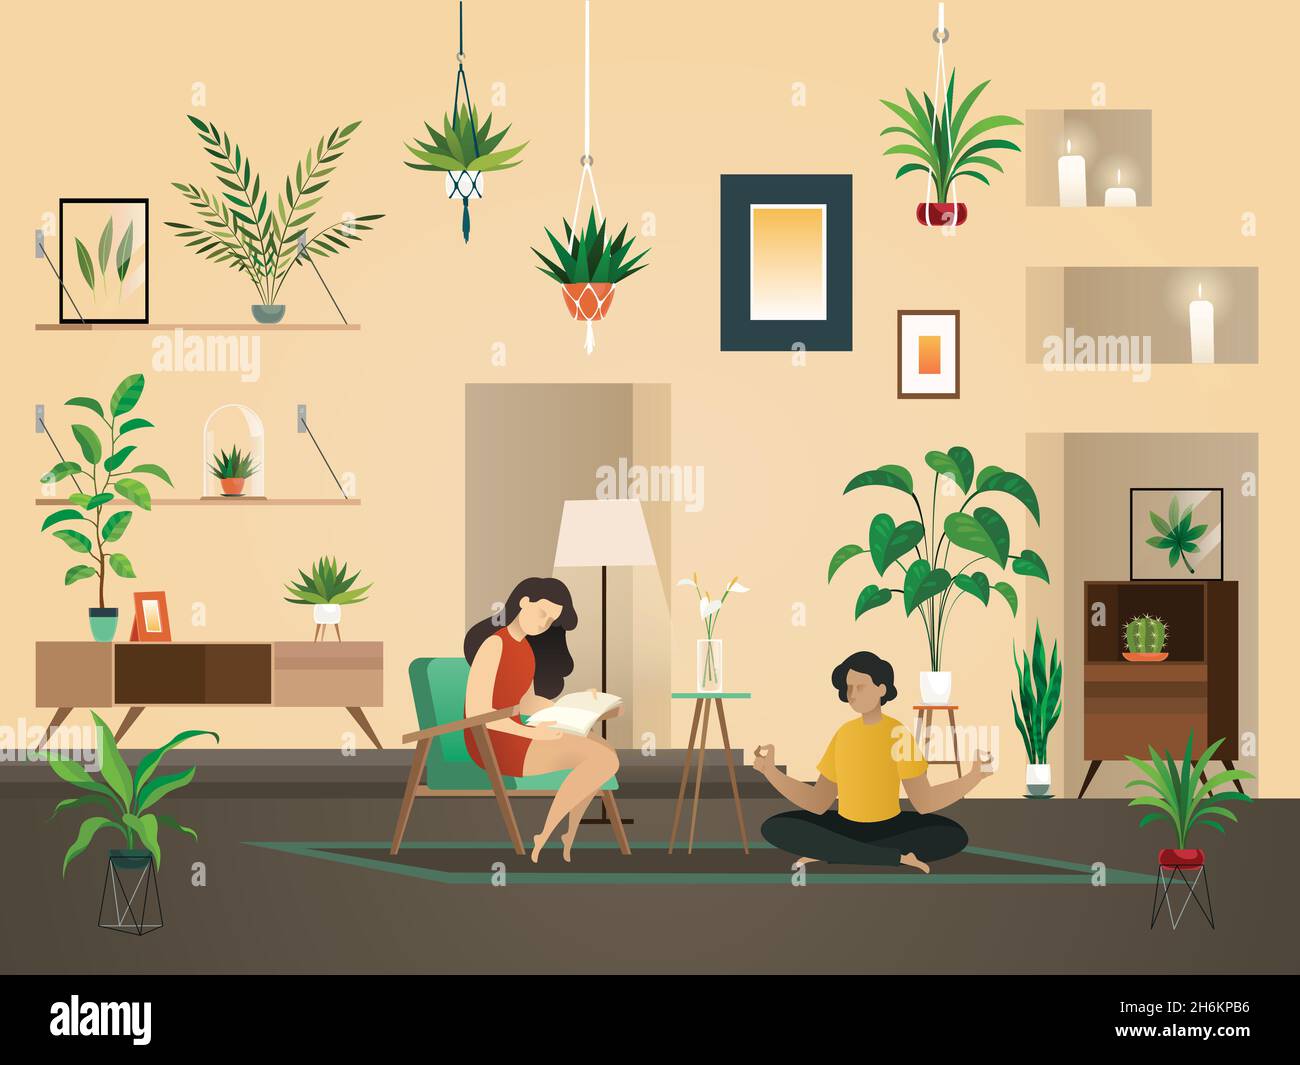 Plants at home indoor. Urban garden with green planting and people in room interior vector illustration. Stock Vector